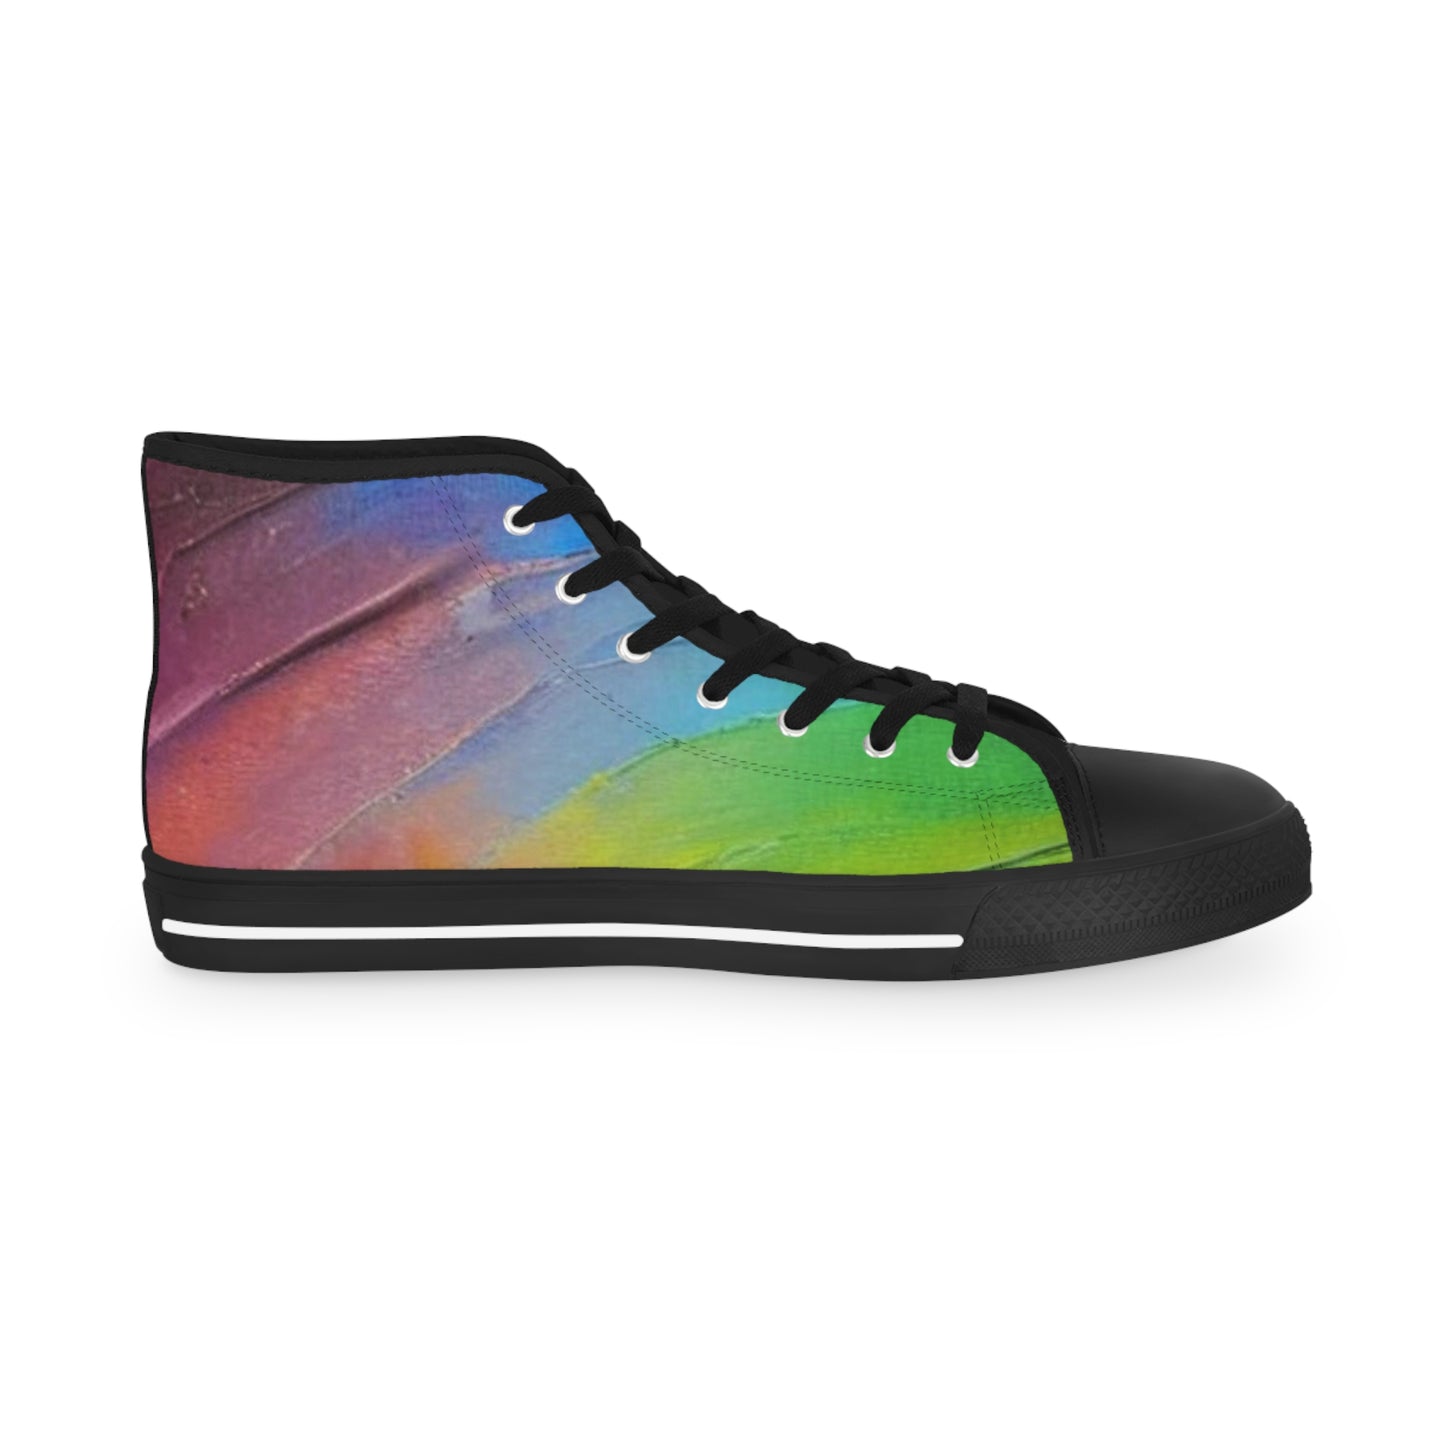 AshleighsCloset Men's High Top Soft Rainbow Oil Painting Inspired Sneakers